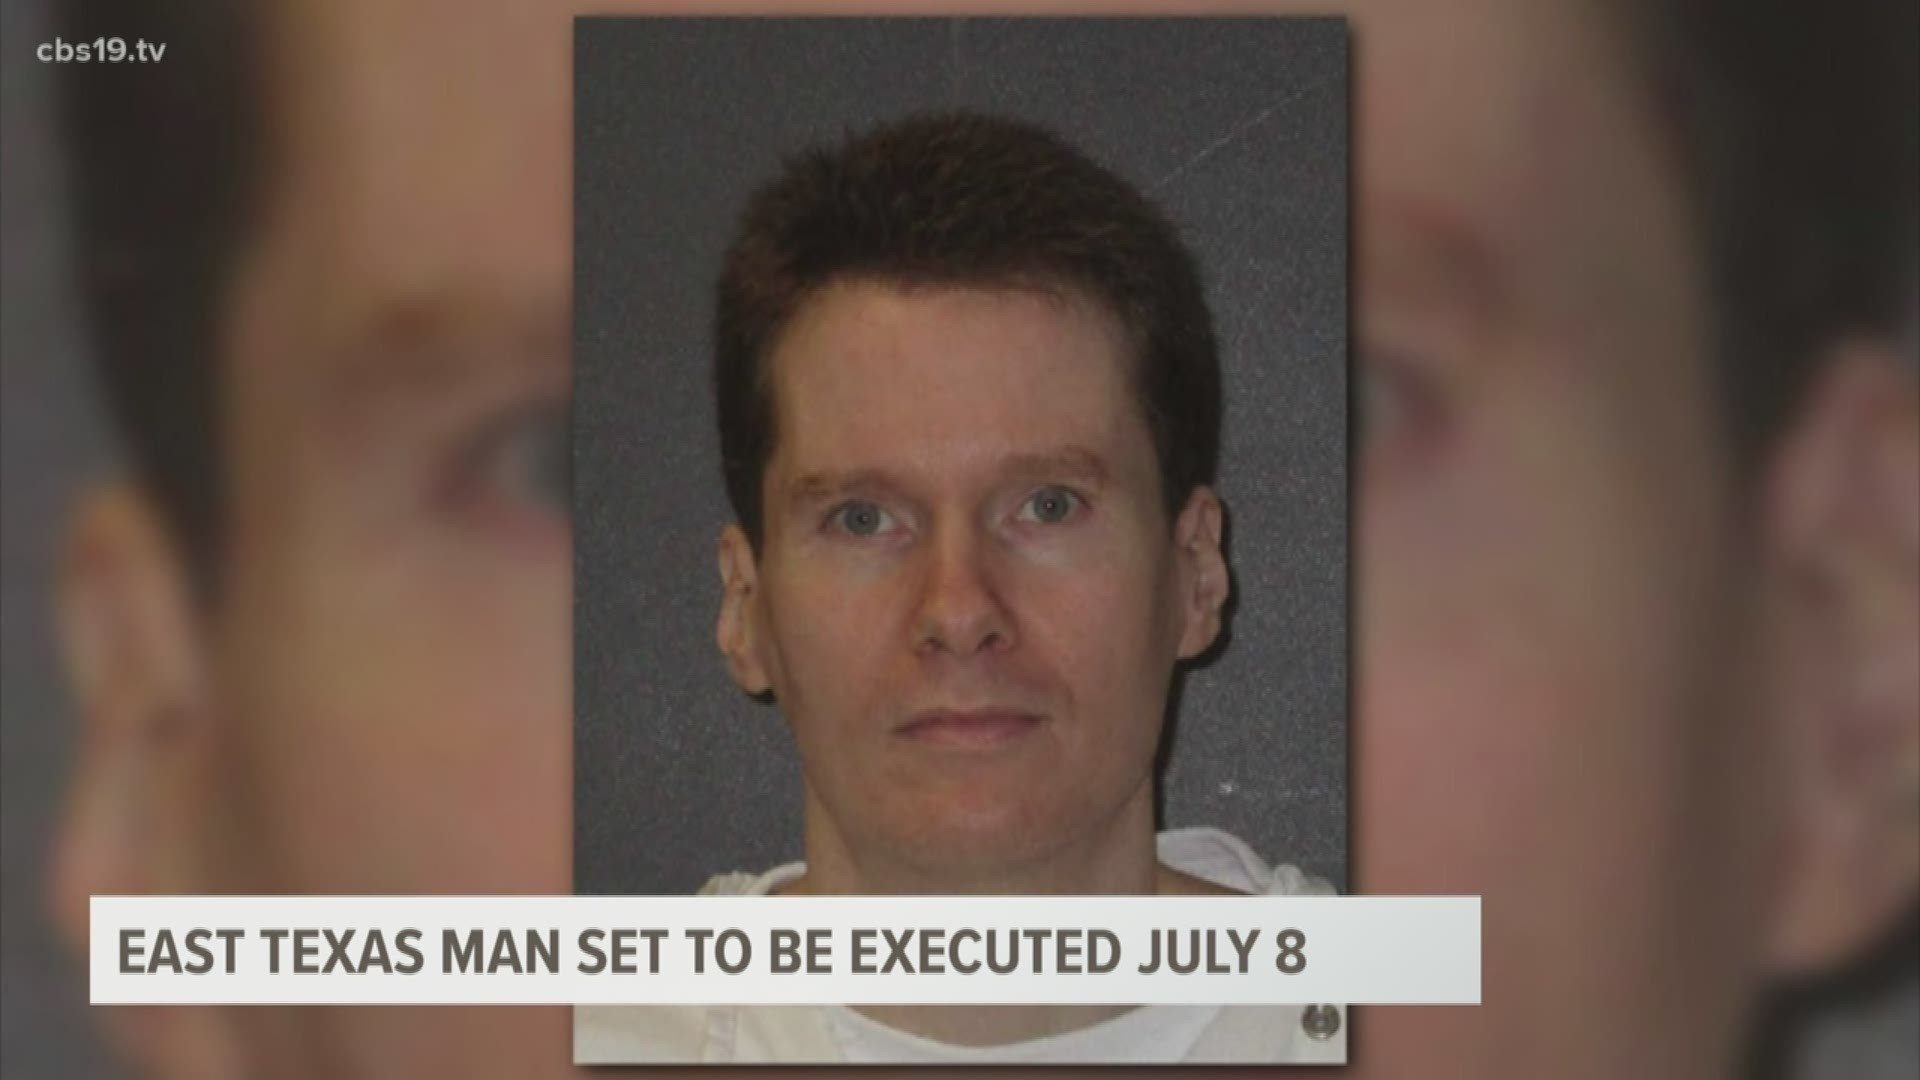 According to the Texas Department of Criminal Justice, Billy Wardlow, 45, of Titus County, will be executed in Huntsville.